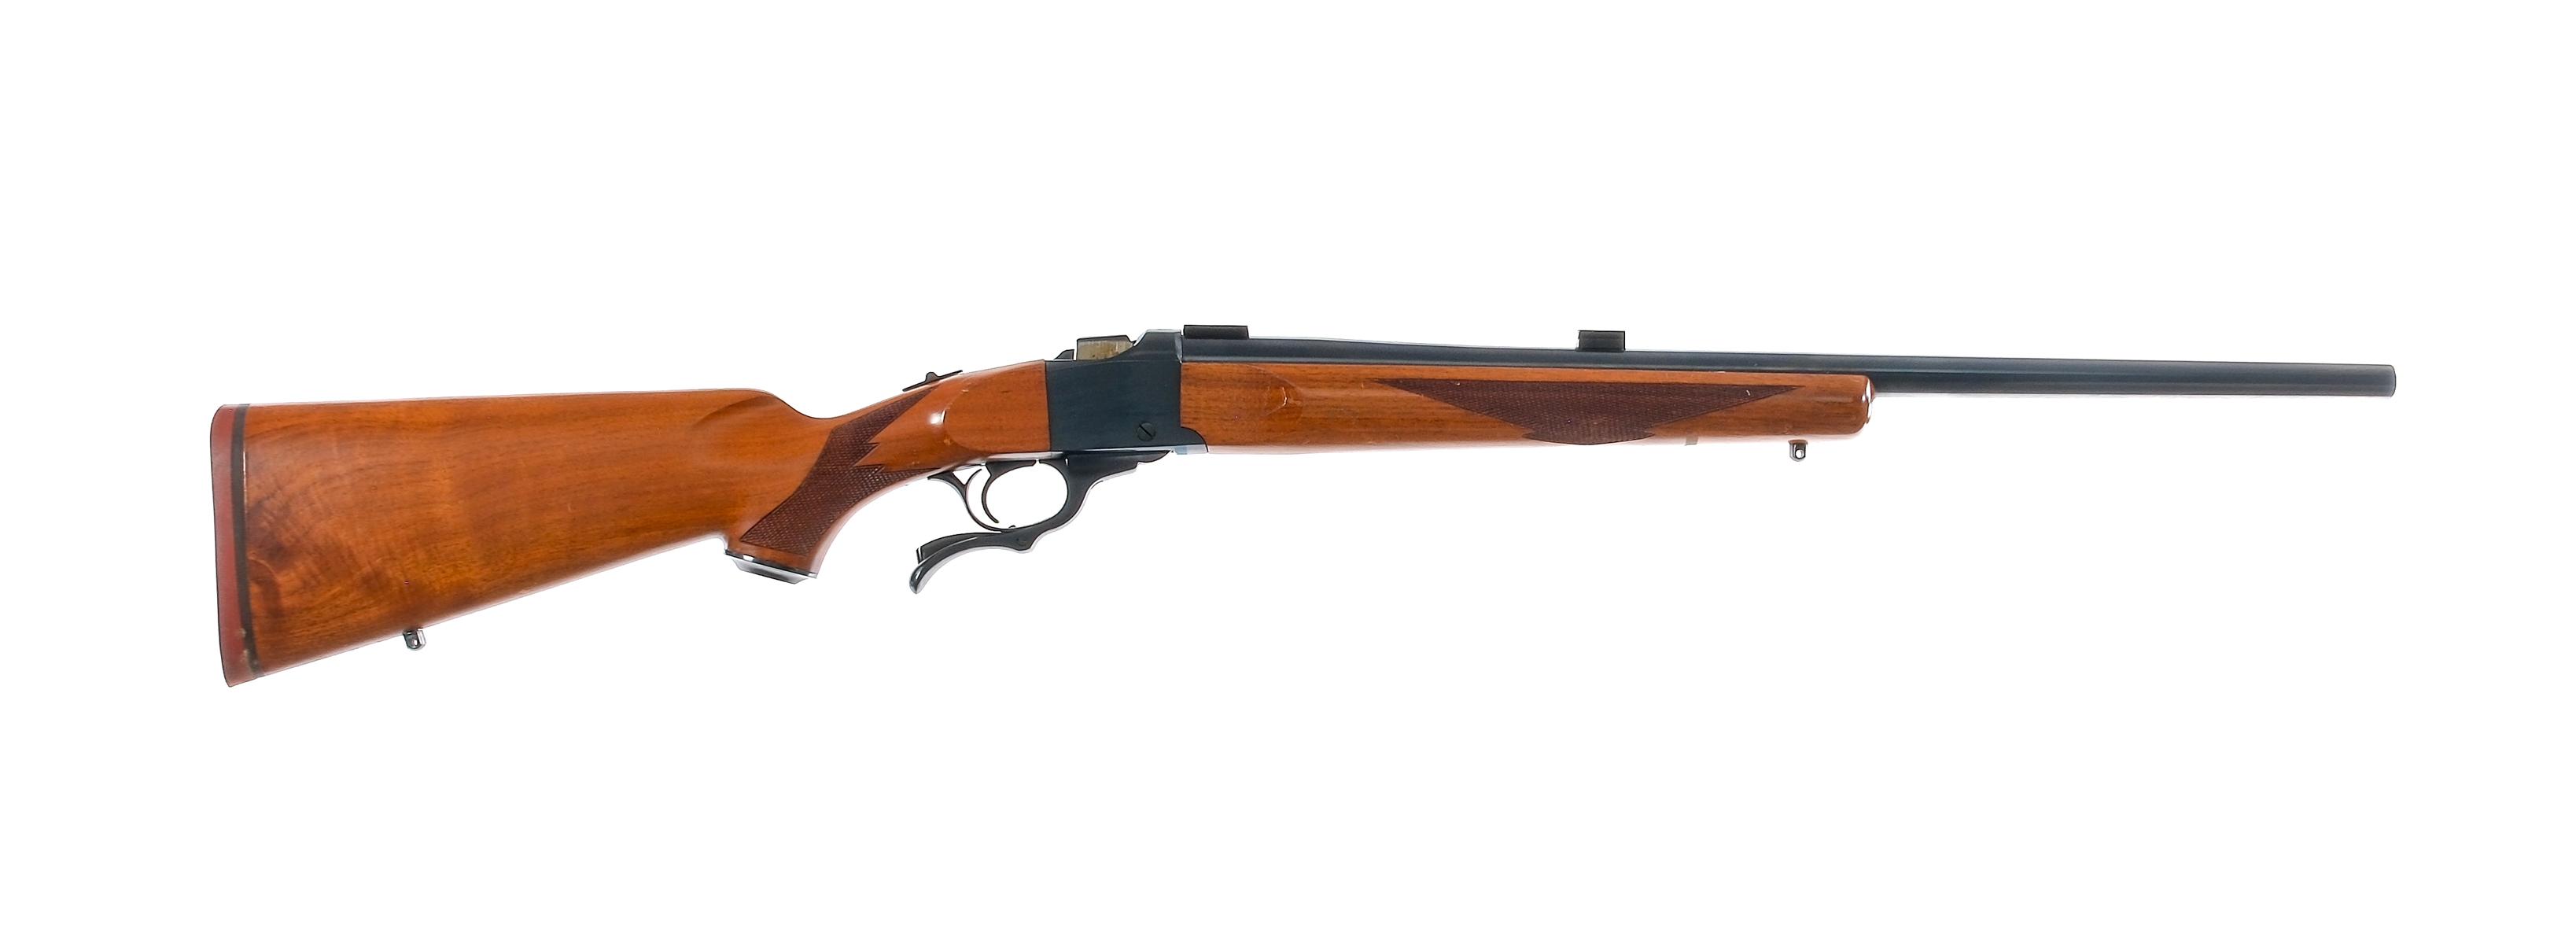 Ruger No 1 .300 Win Mag Lever Action Rifle